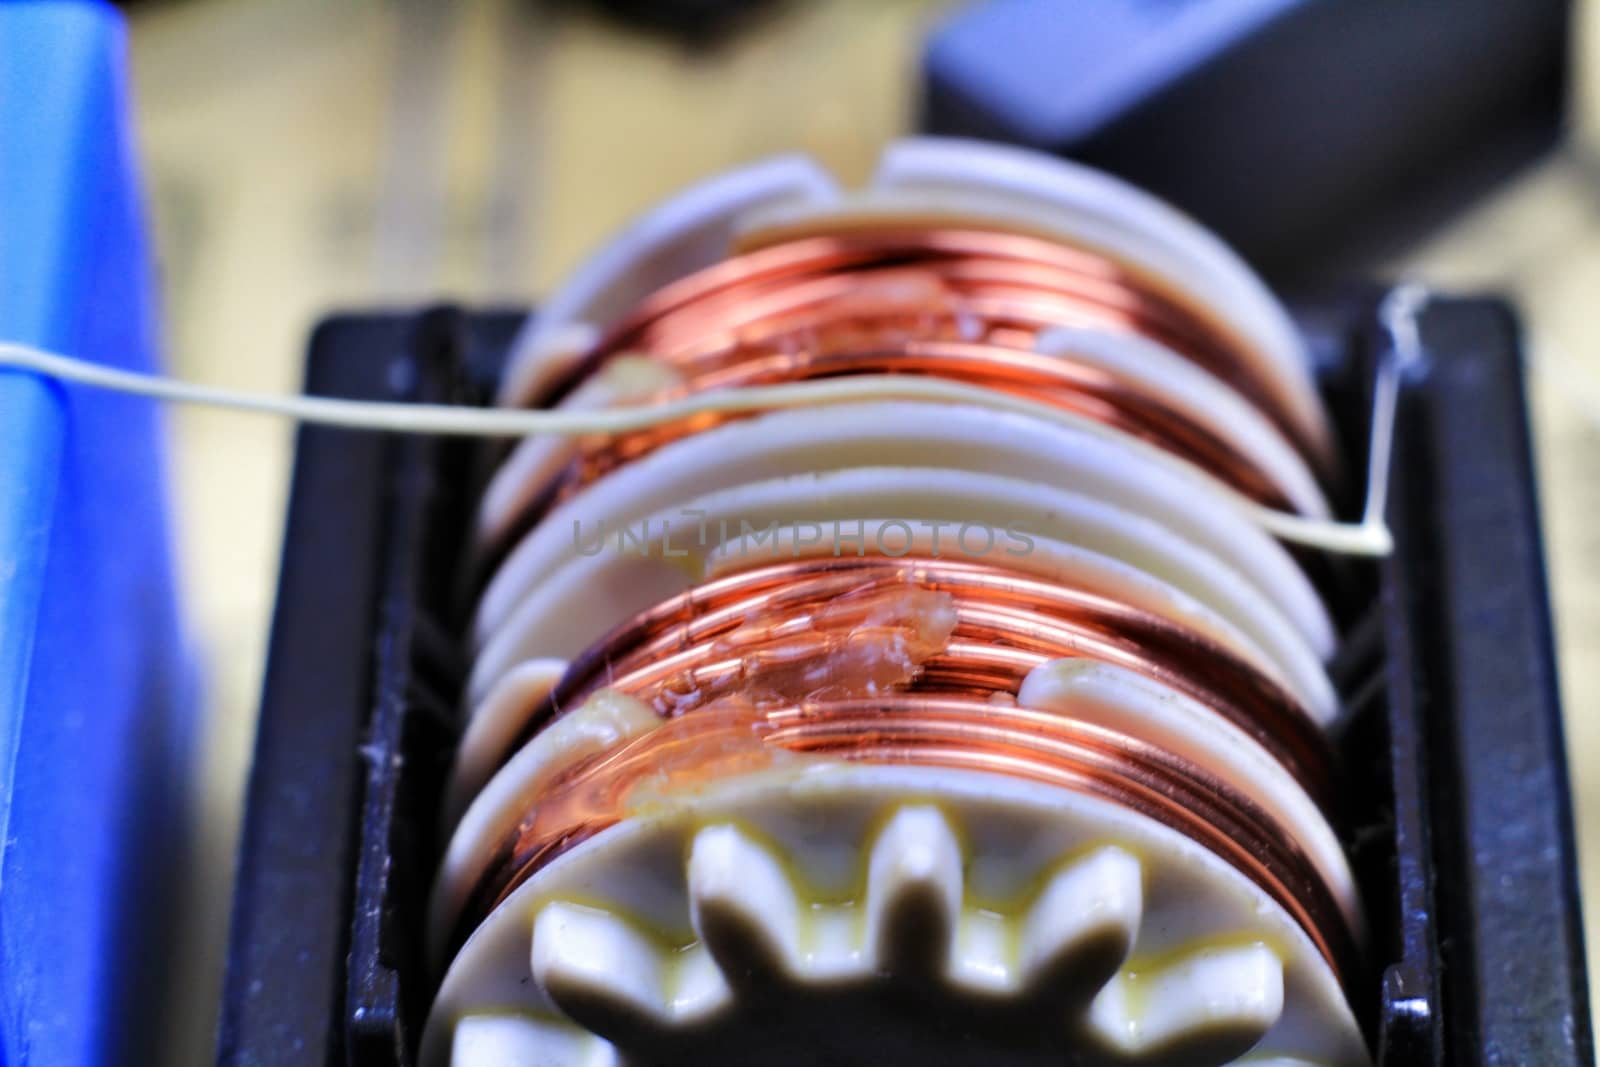 Electromagnetic coil on a motherboard by soniabonet